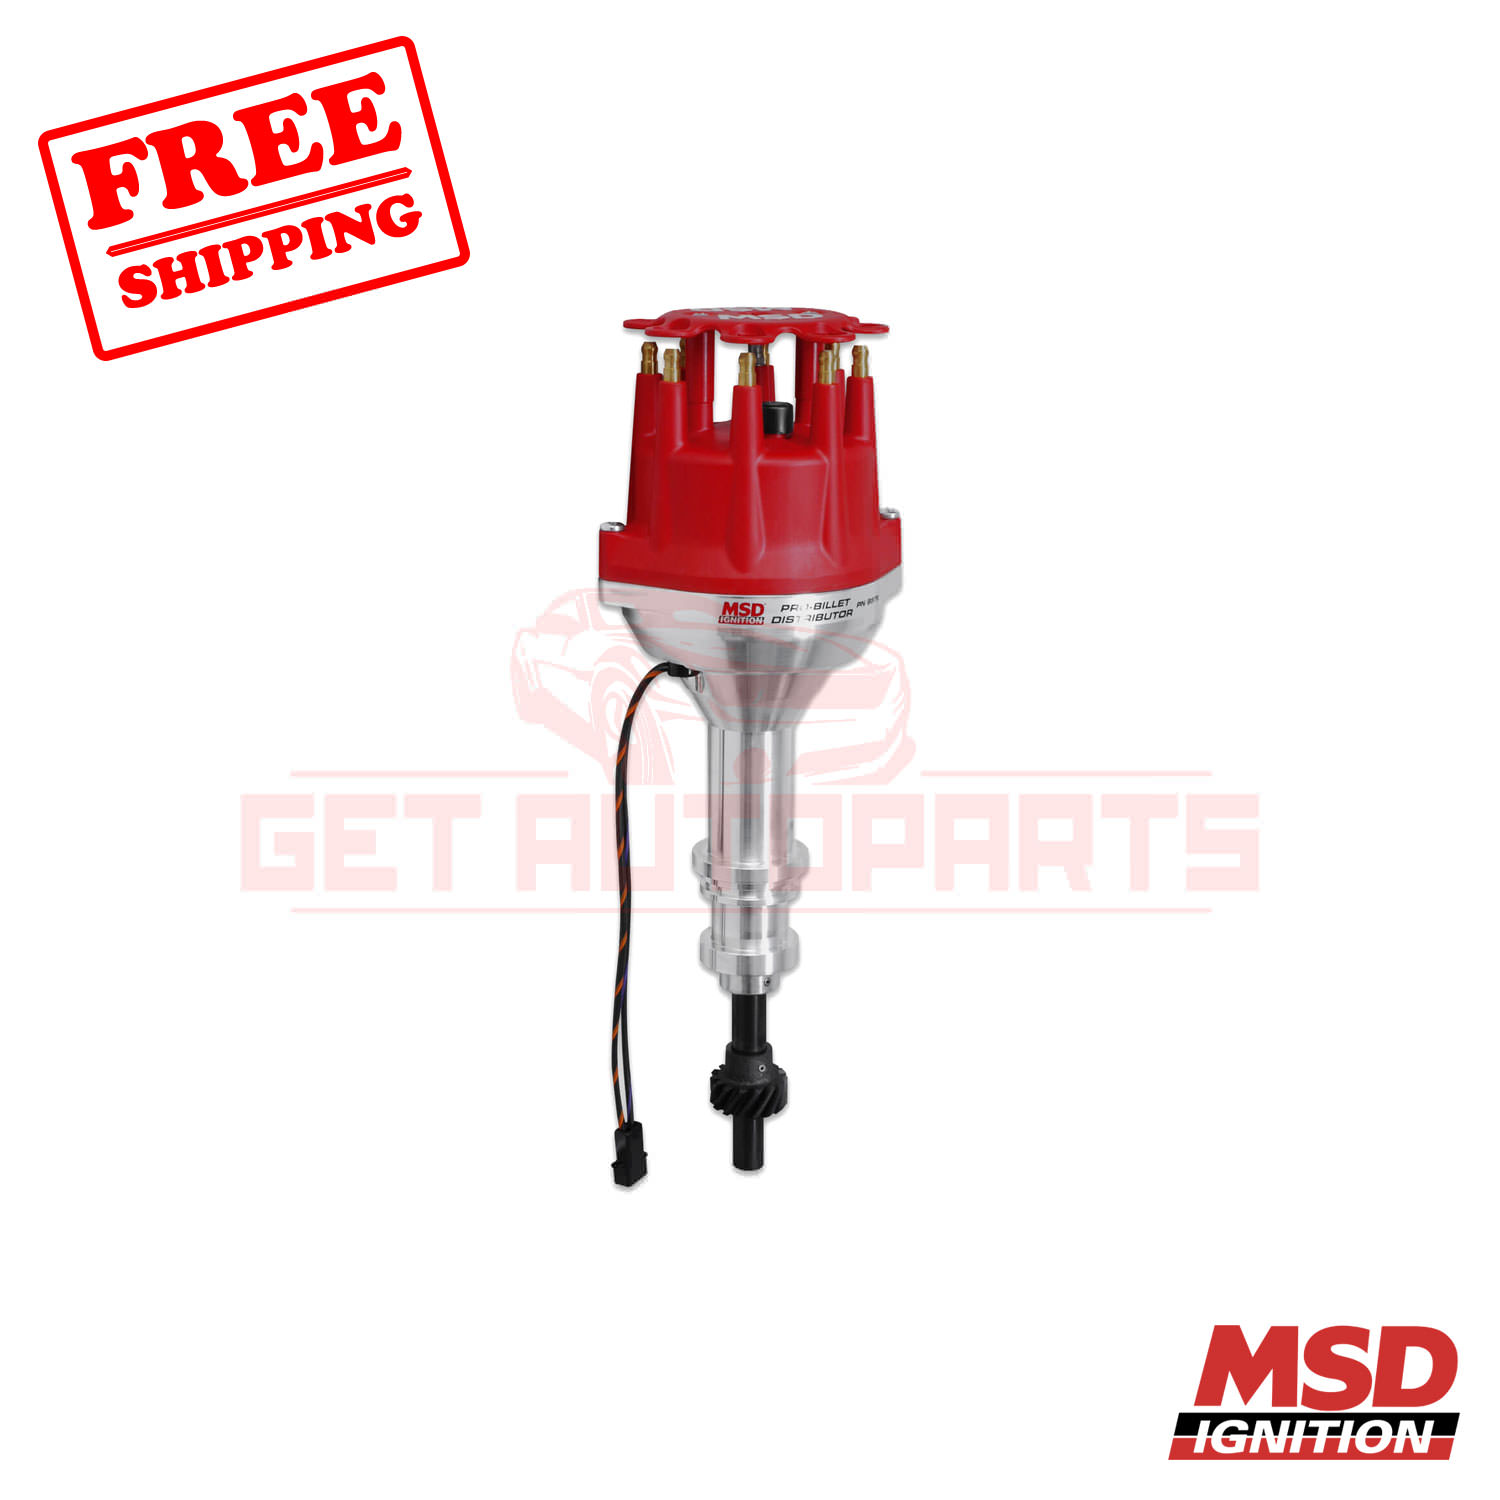 MSD Distributor fits Ford 75-1996